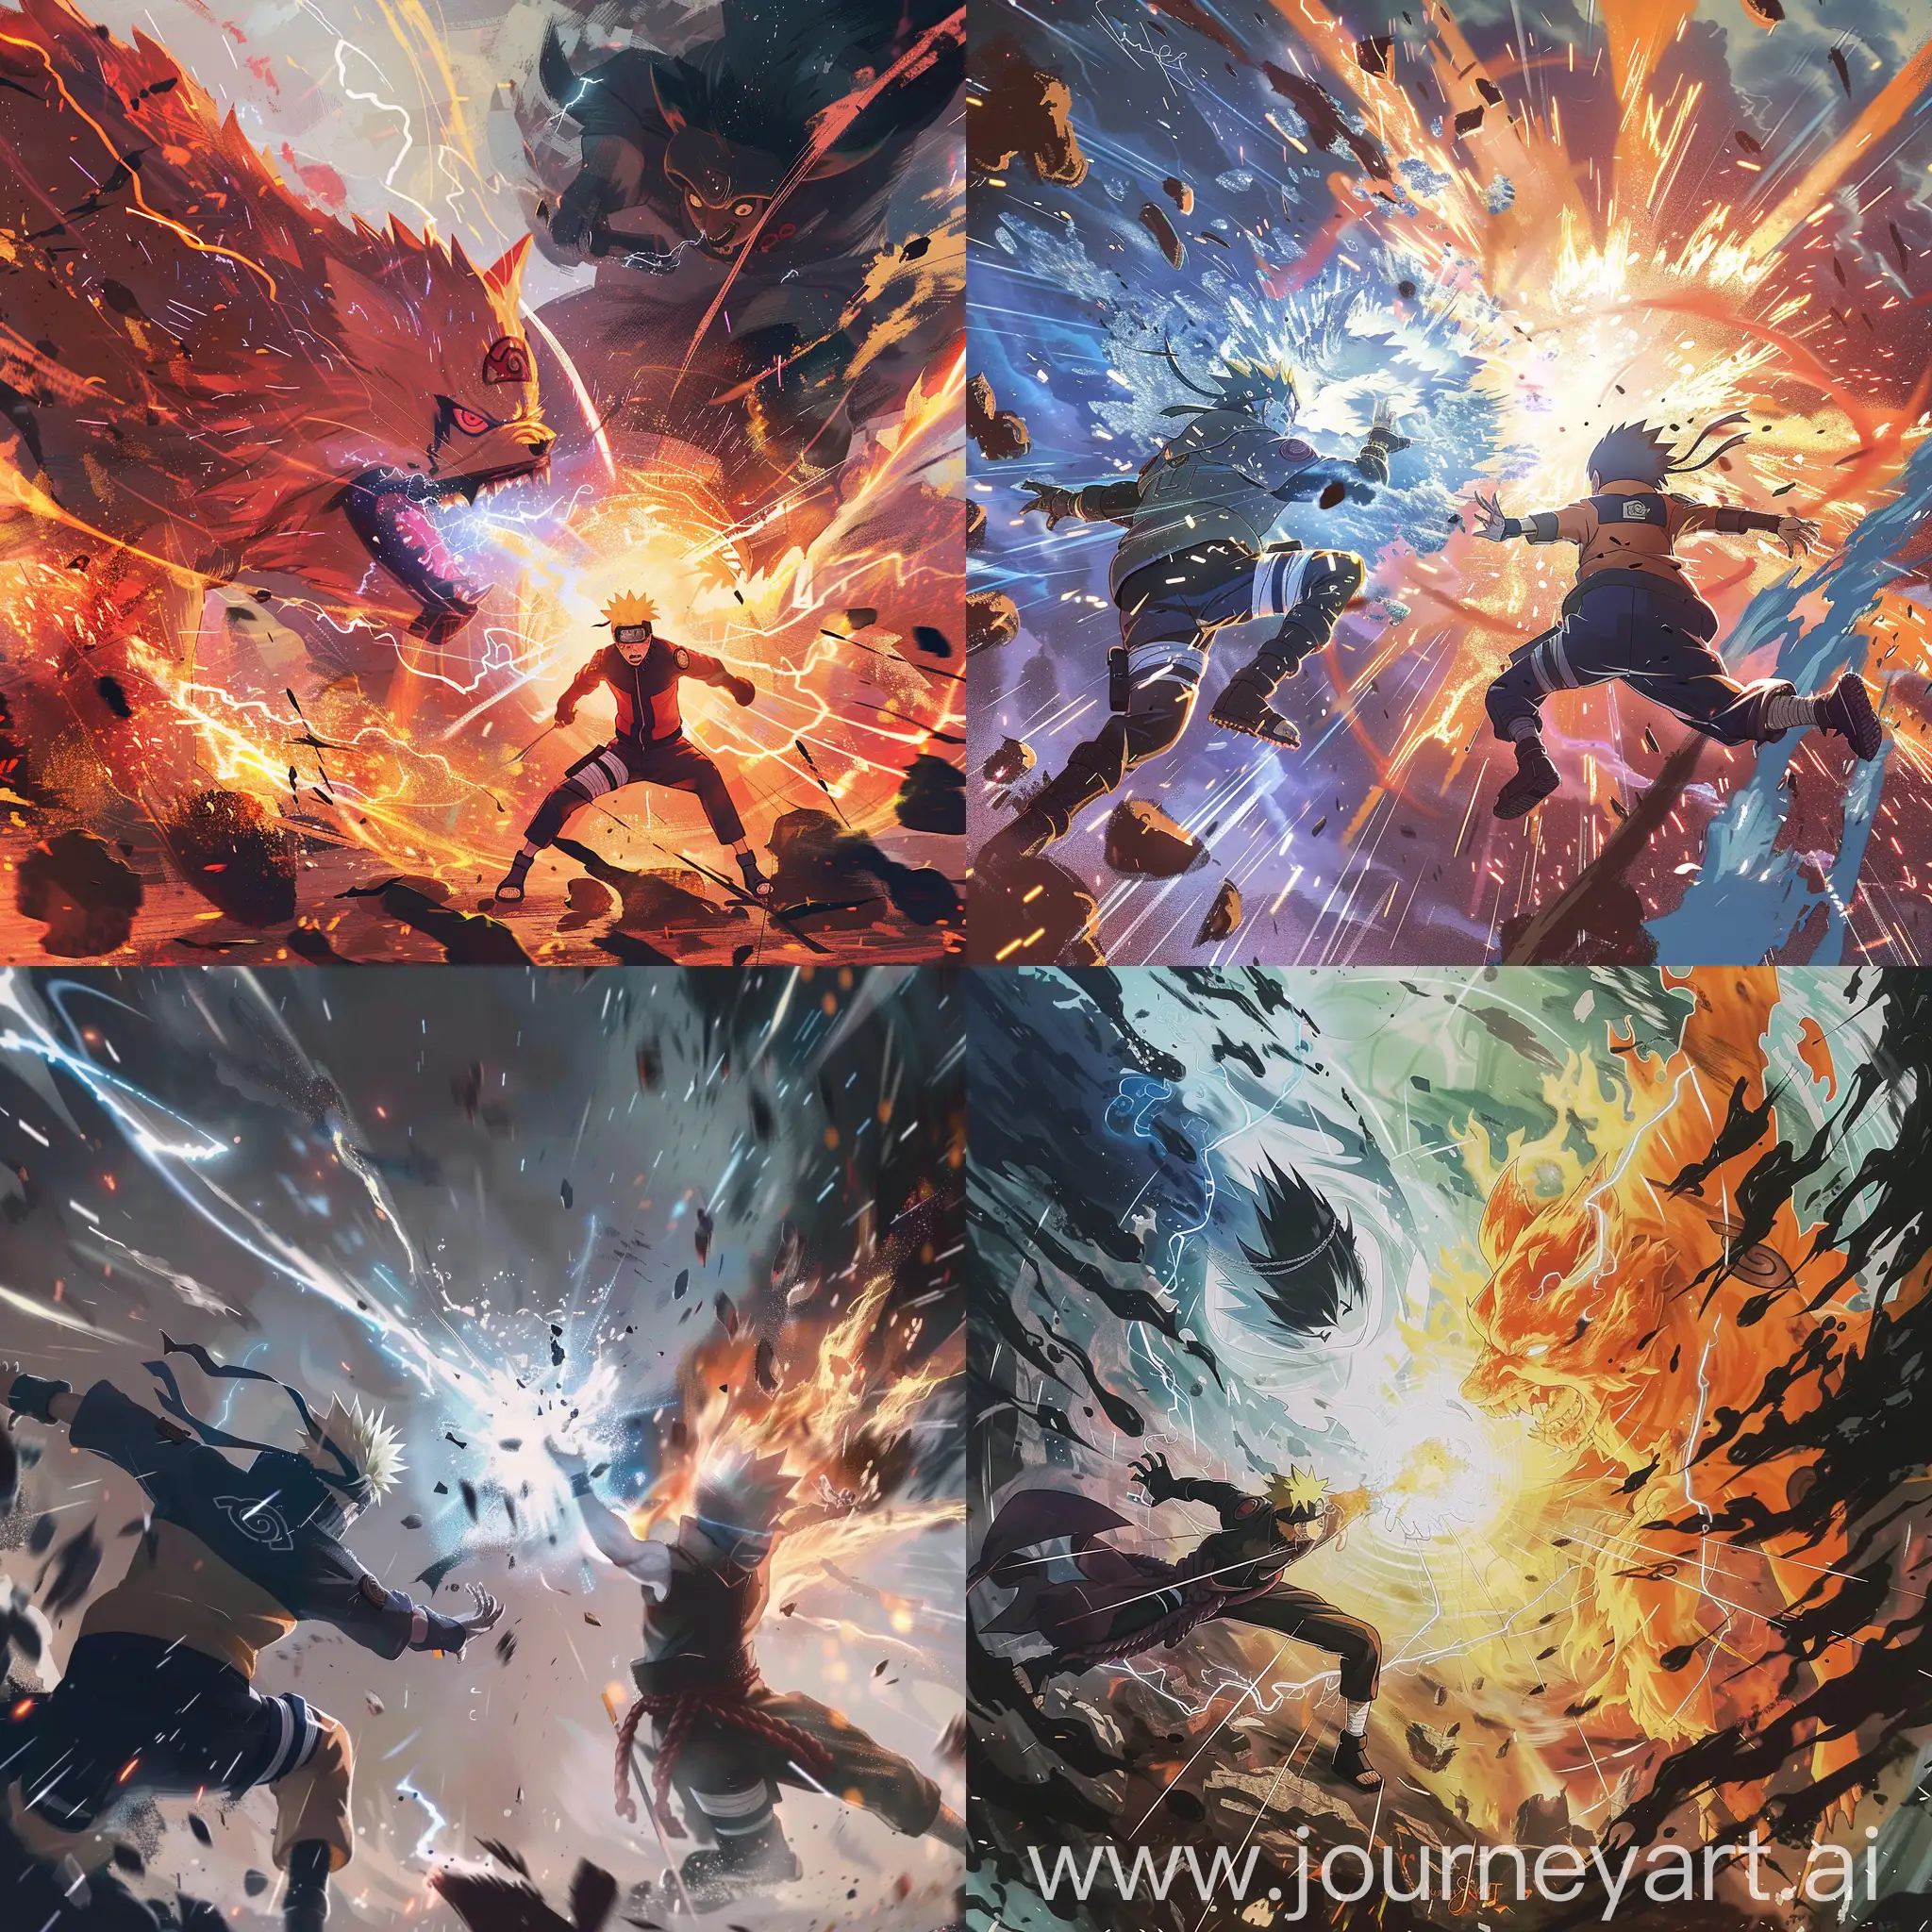 Epic-Naruto-vs-Rival-Battle-Intense-Anime-Art-with-Dynamic-Poses-and-Impactful-Special-Effects